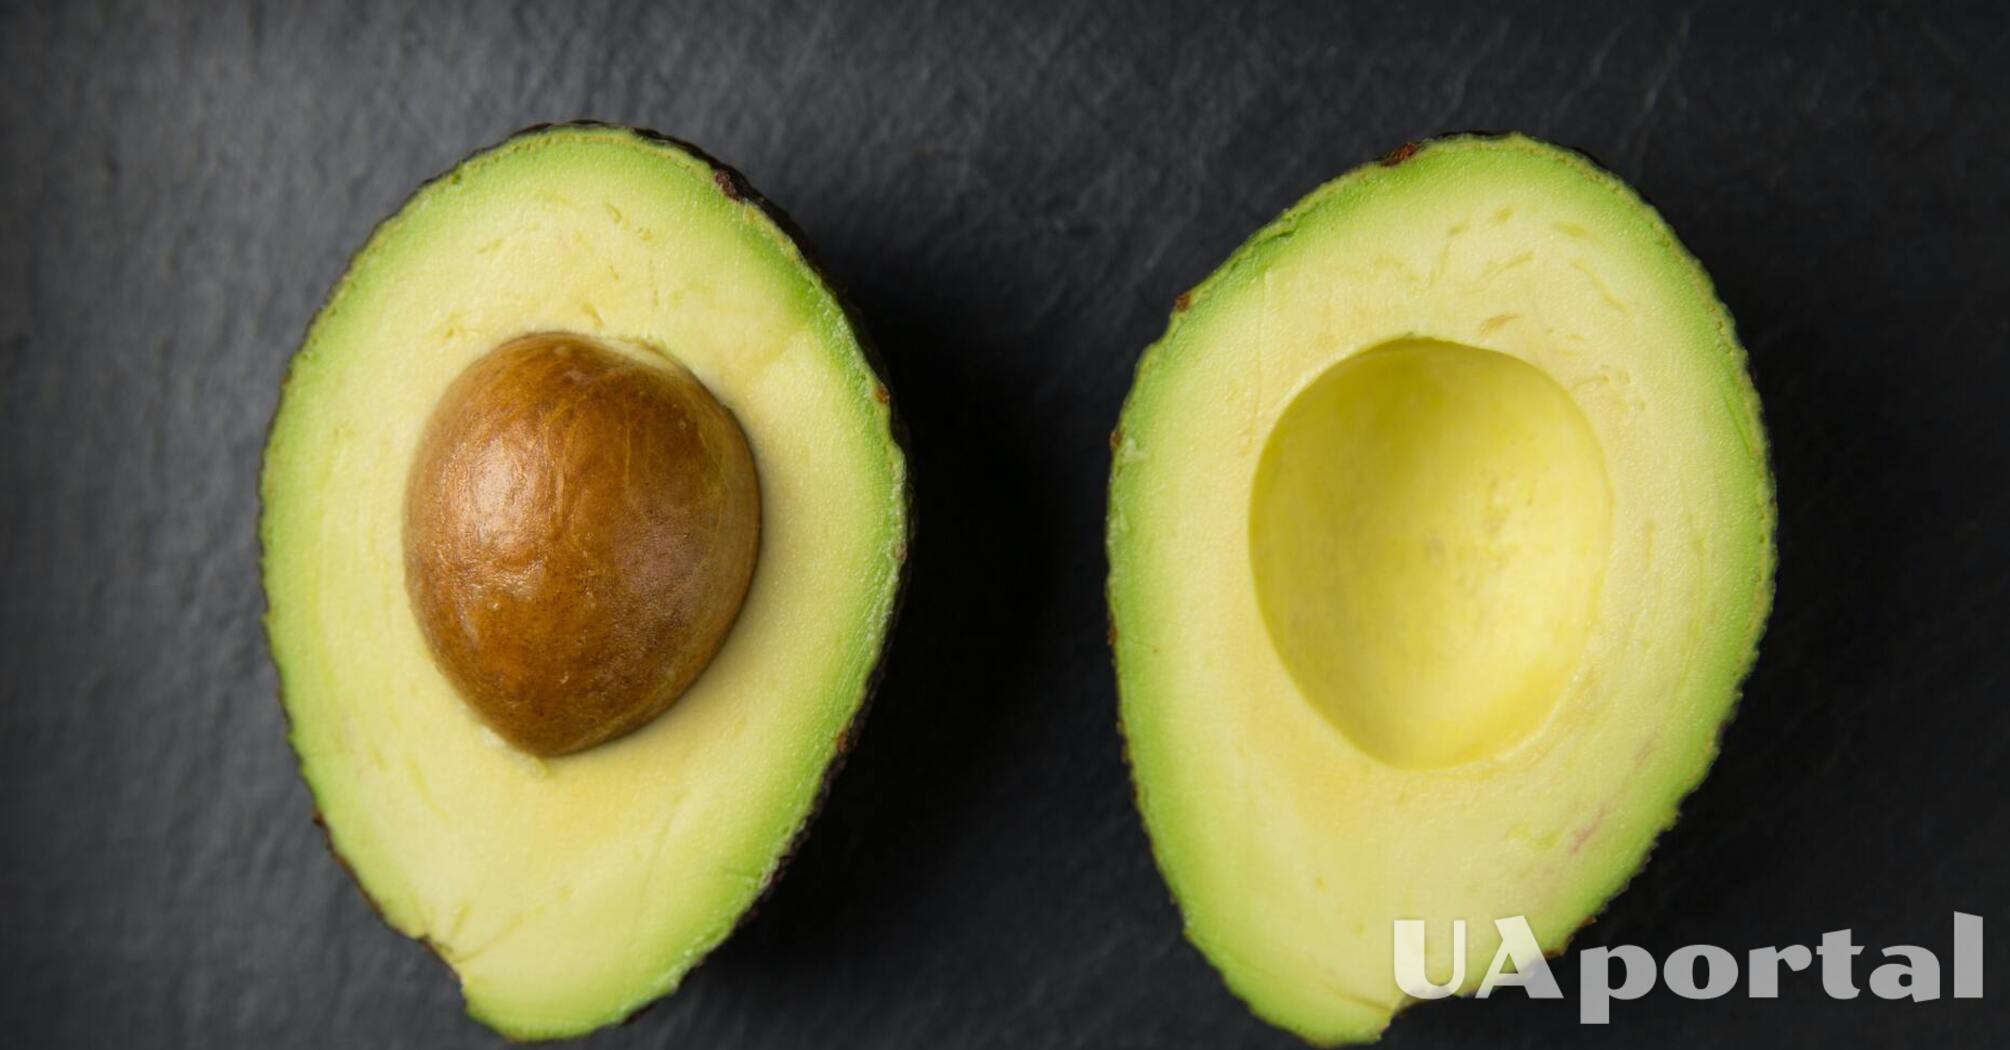 Nutritionist explains whether you can eat too much avocado